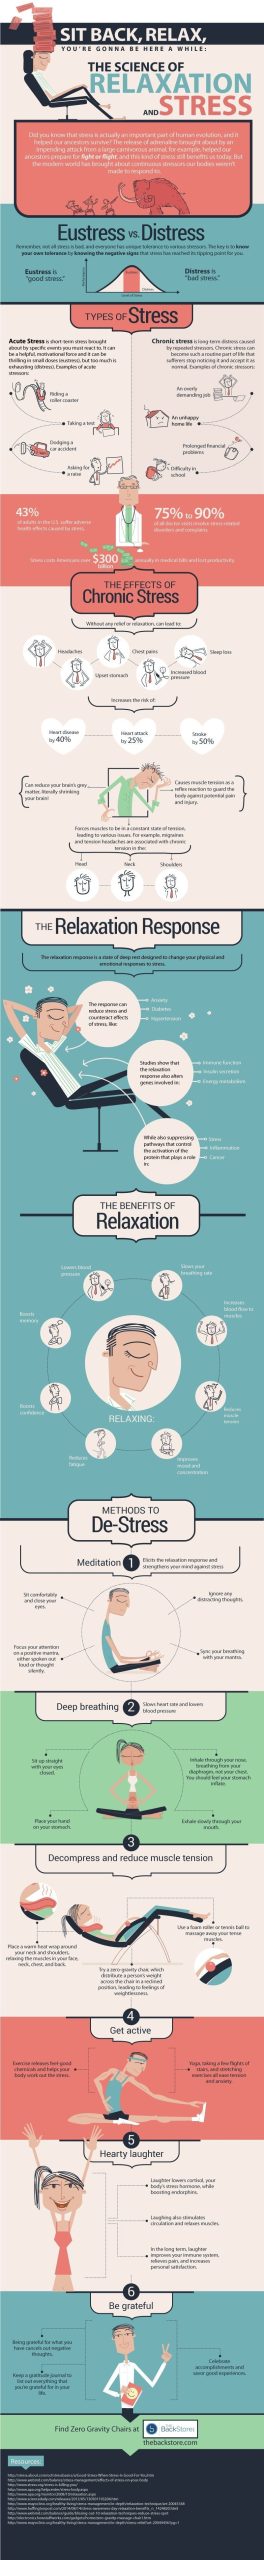 The Science of Relaxation and Stress - #health #infographics #wellness